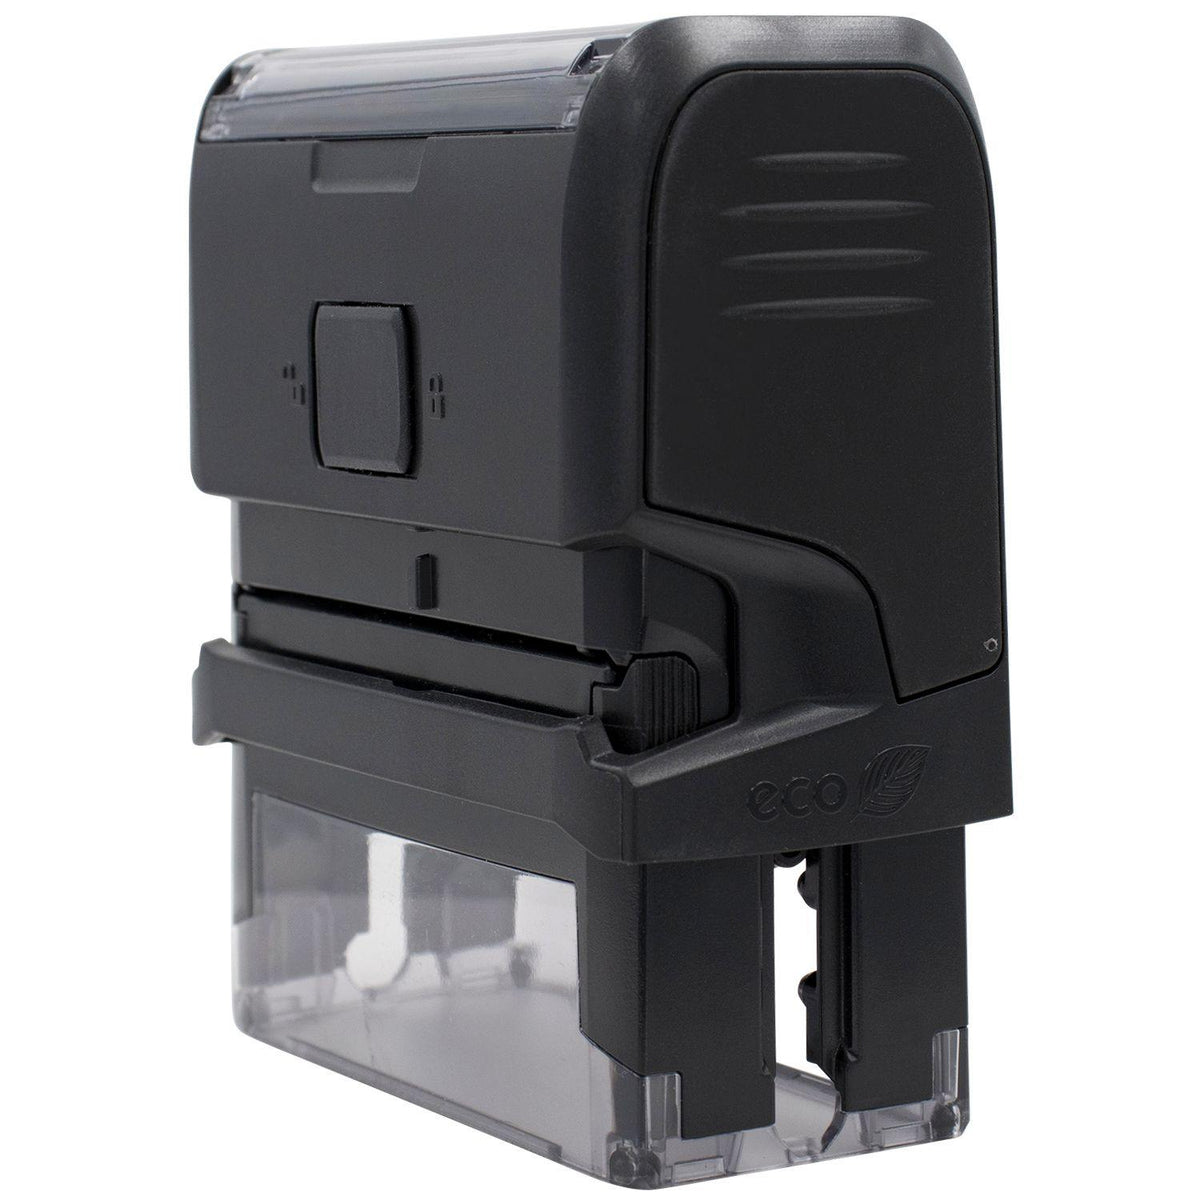 Self-Inking Avis De Receiption Stamp - Engineer Seal Stamps - Brand_Trodat, Impression Size_Small, Stamp Type_Self-Inking Stamp, Type of Use_Office